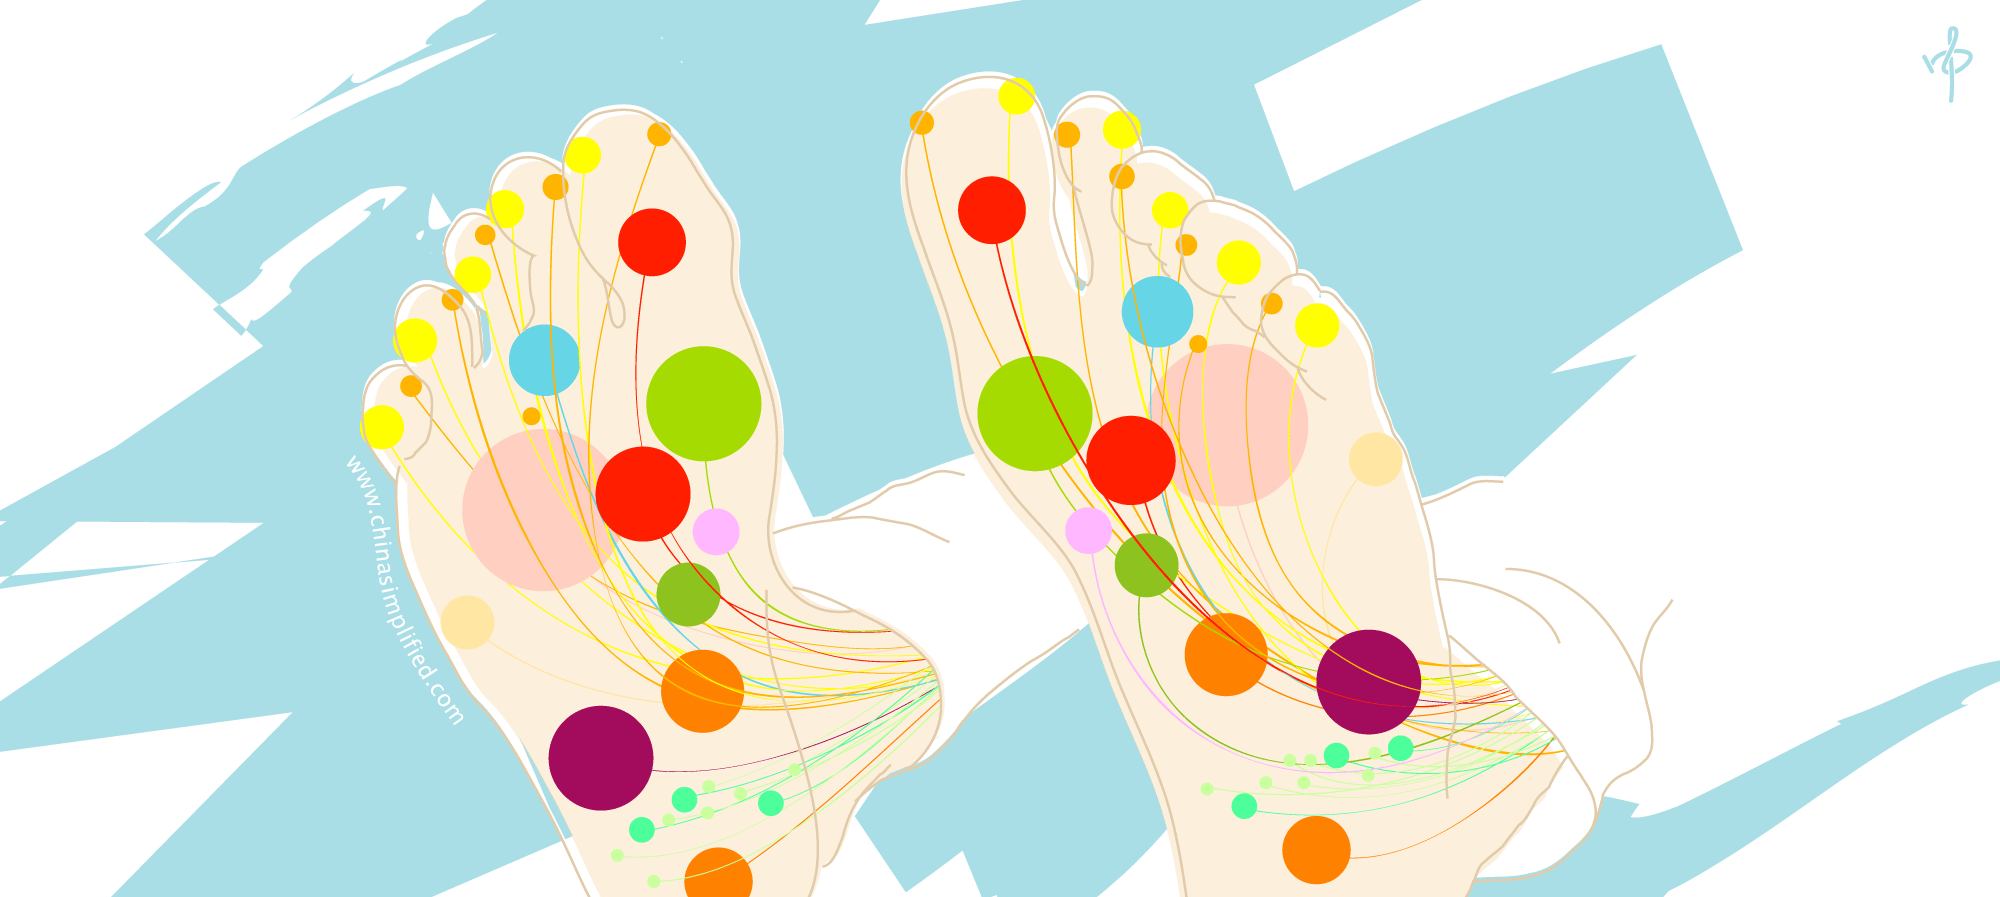 Fall in love with your feet! Healing through foot massage, acupressure and reflexology